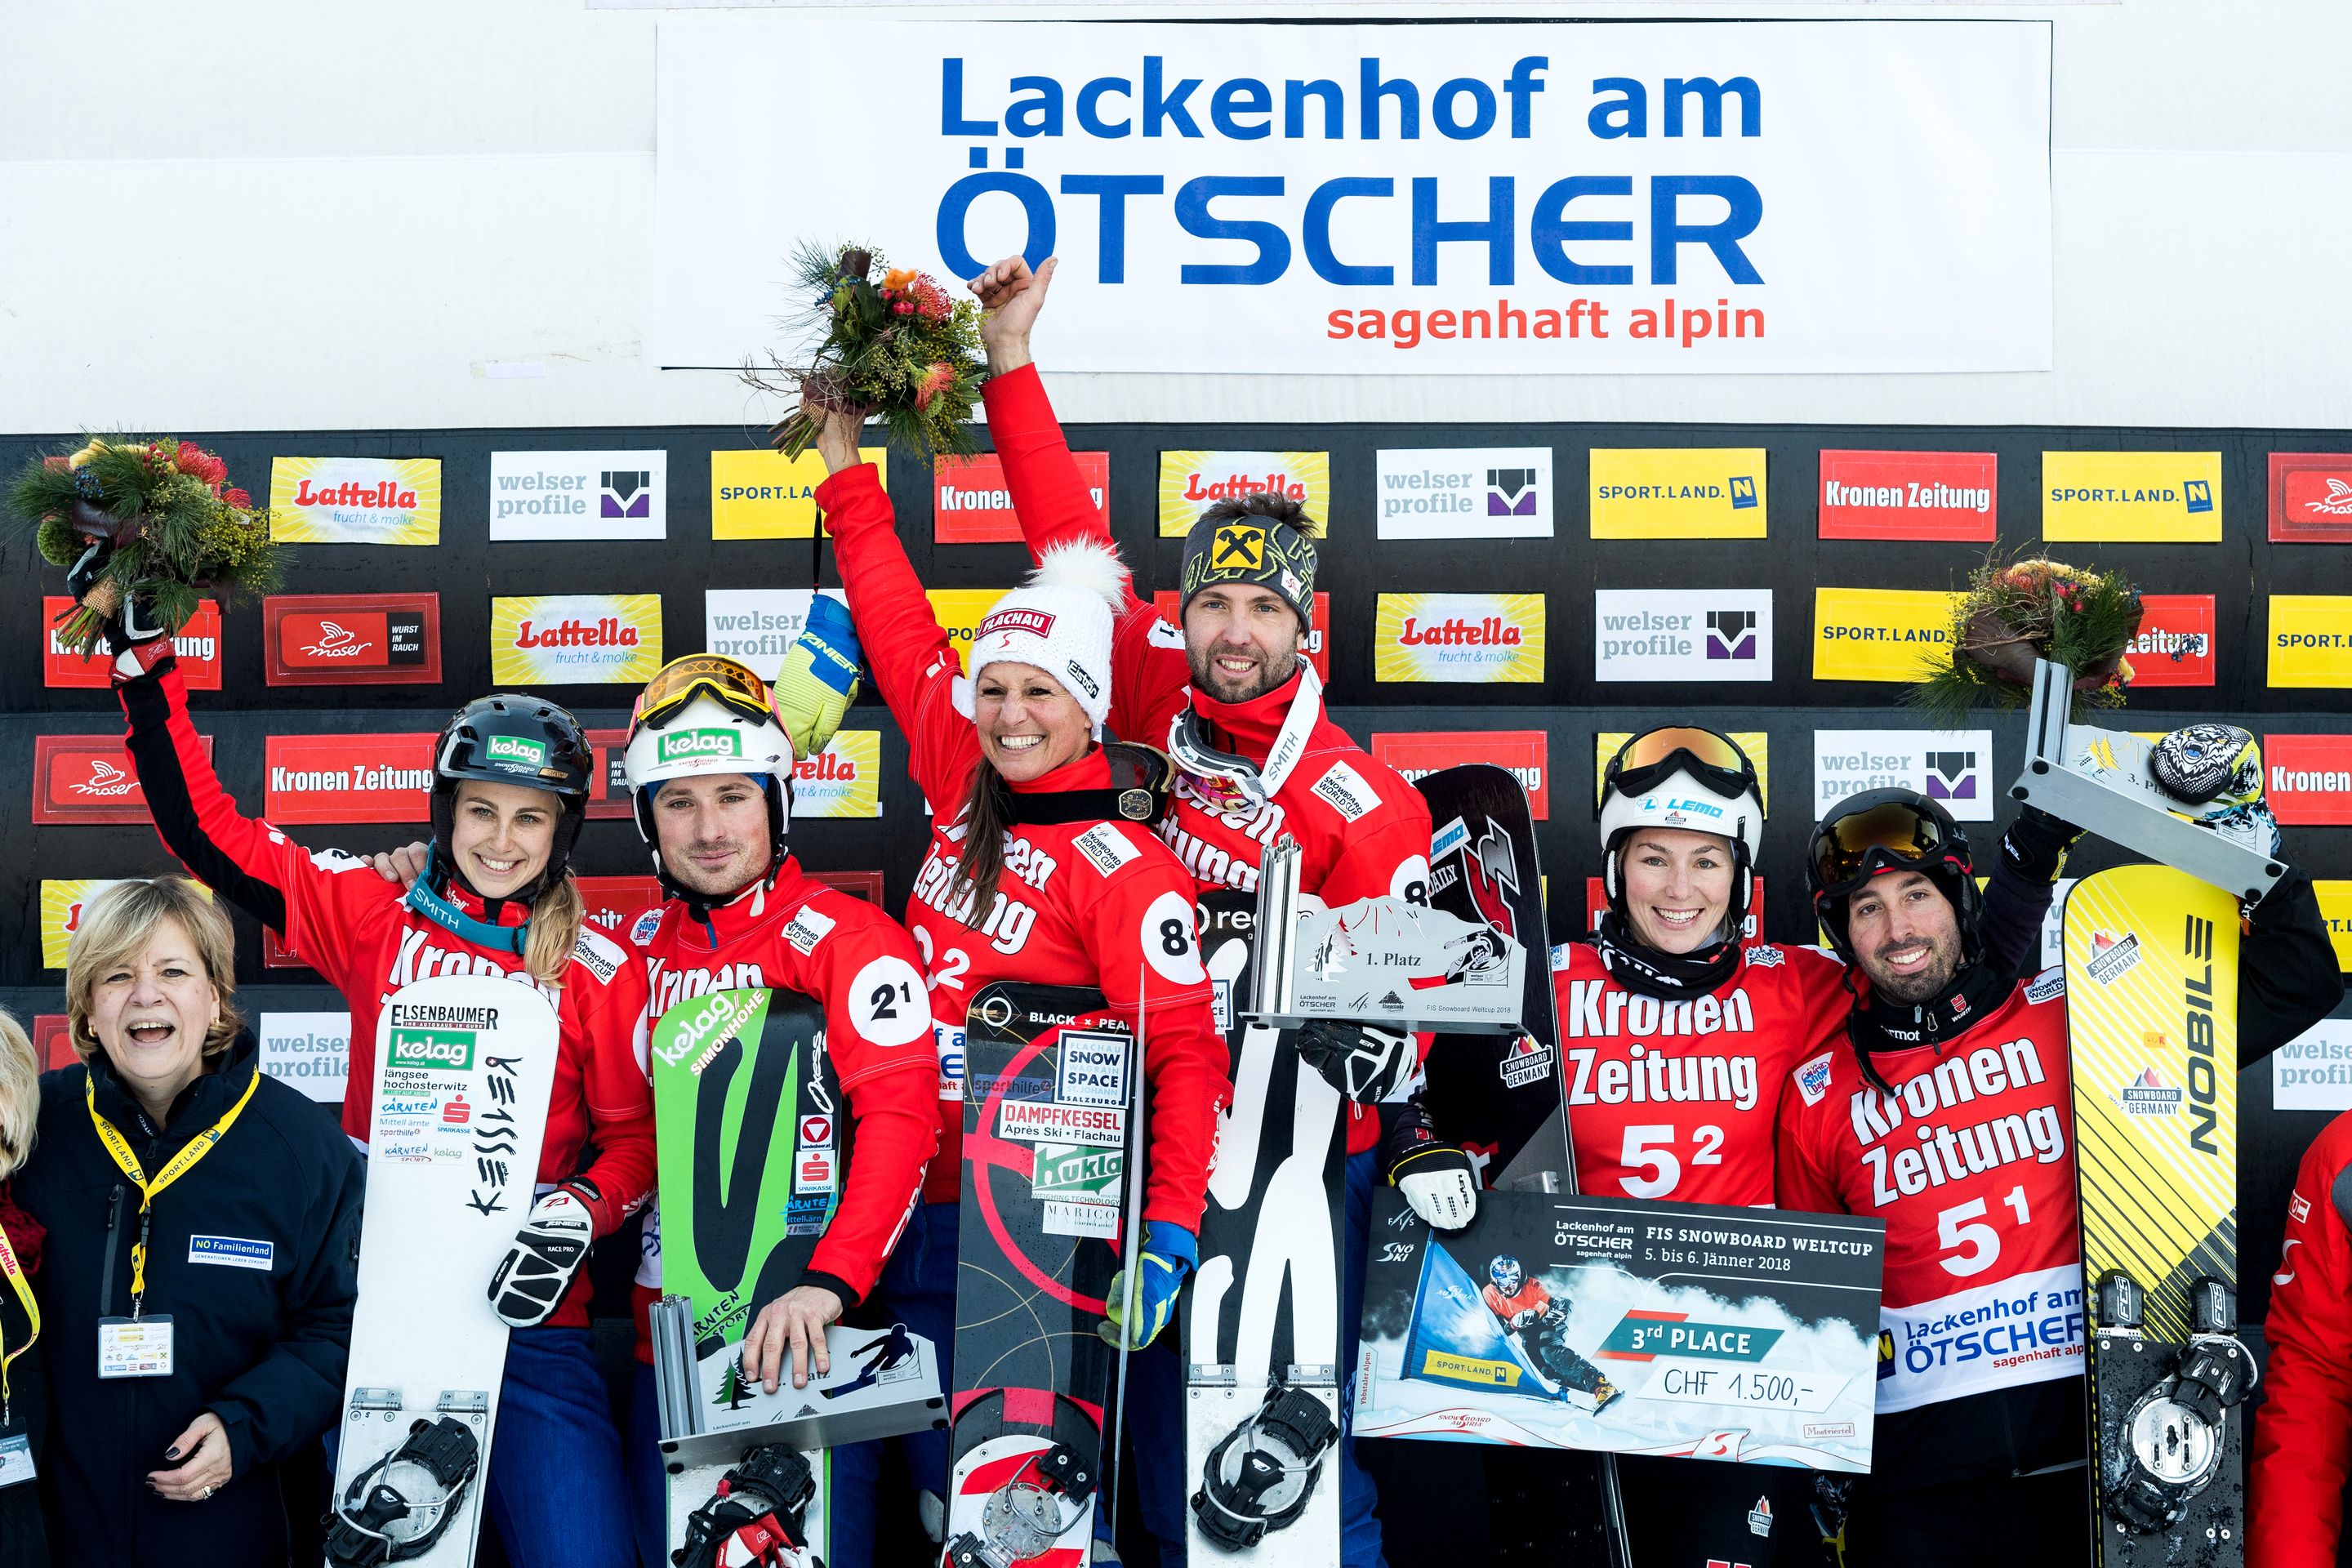 FIS Snowboard World Cup - Lackenhof AUT - Snowboard Parallel Team Event - Podium with 2nd team AUT1(SCHOEFFMANN Sabine and PAYER Alexander), 1st team AUT3 (RIEGLER Claudia and PROMMEGGER Andreas) and 3rd team GER1 (JOERG Selina and BUSSLER Patrick) © Miha Matavz/FIS